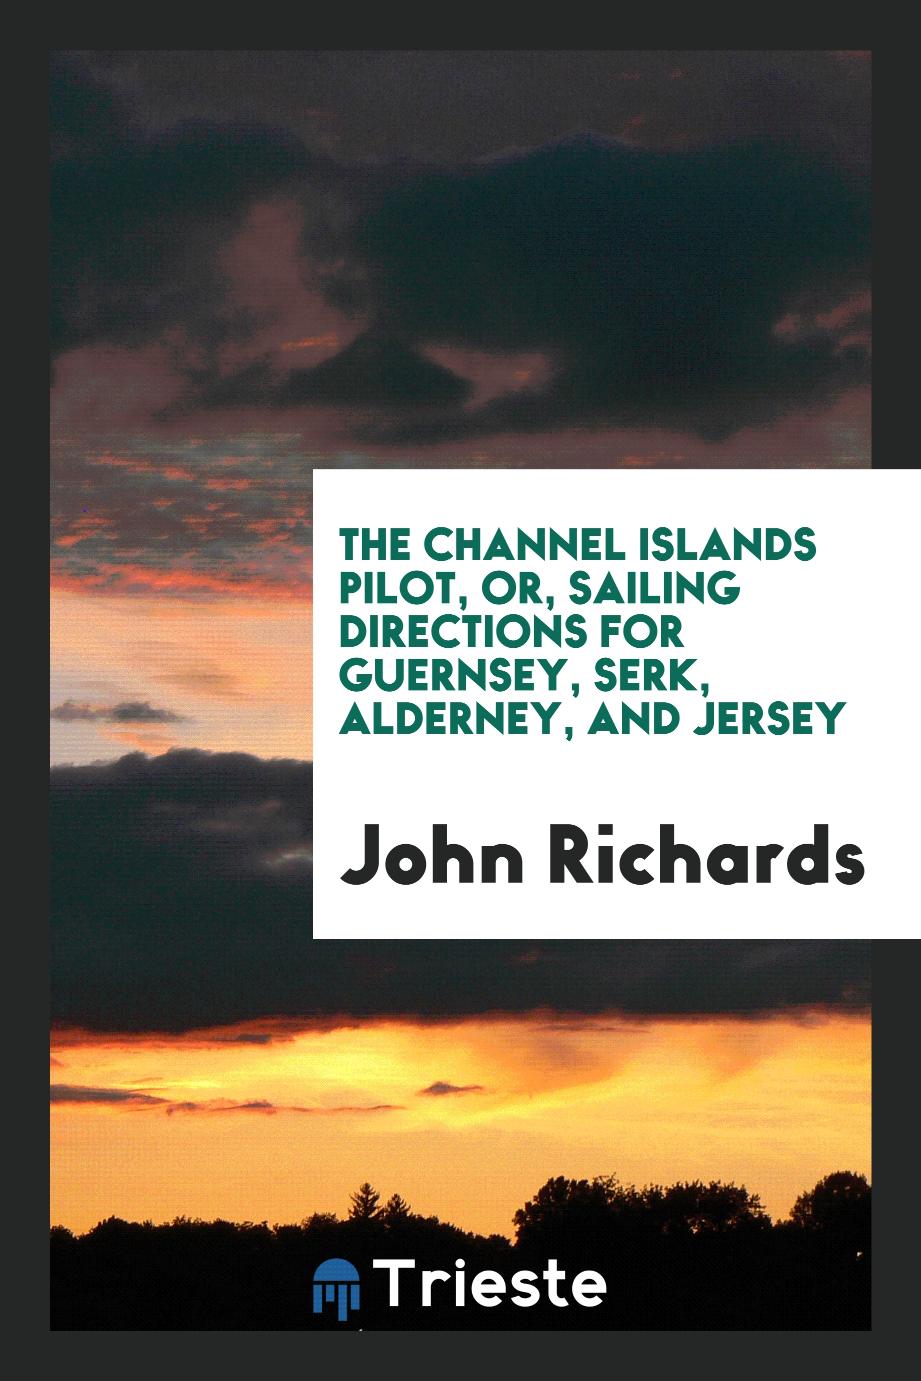 The Channel Islands Pilot, or, Sailing Directions for Guernsey, Serk, Alderney, and Jersey